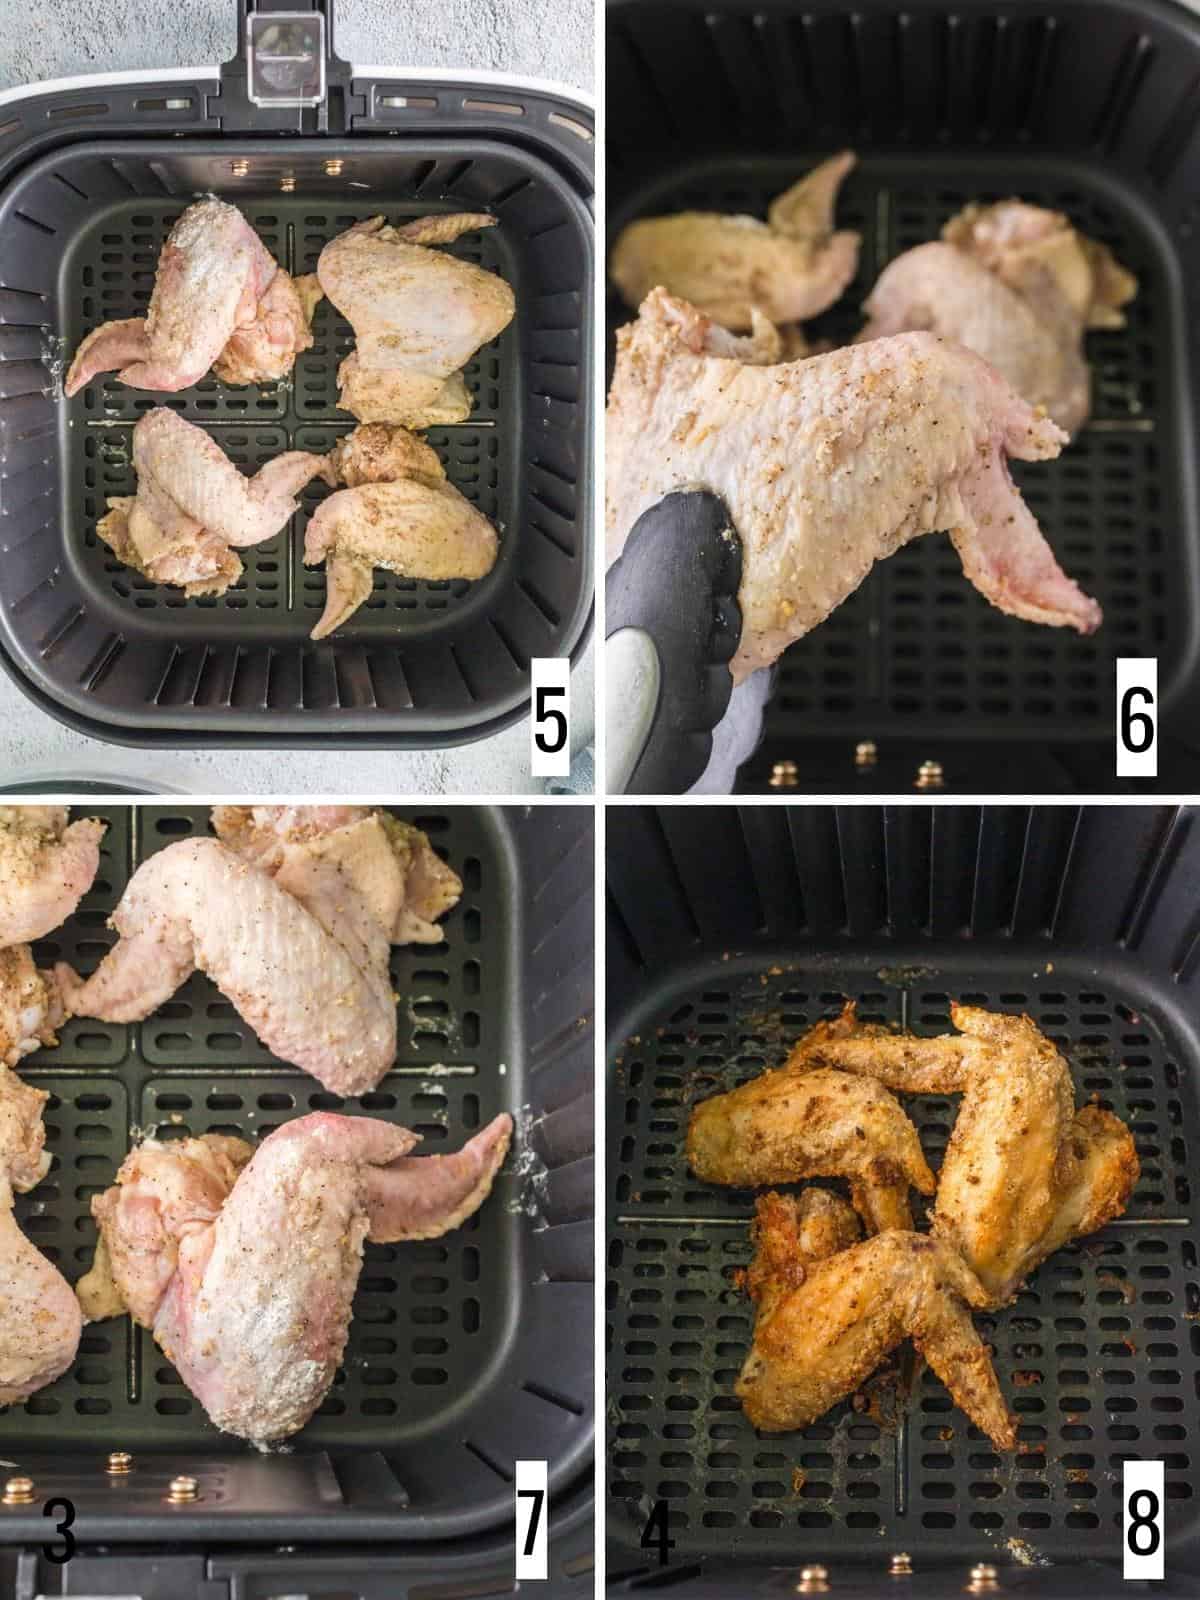 Step-by-step photos show adding seasoned chicken wings to air-fried, cooking wings, turning wings, and finishing frying.